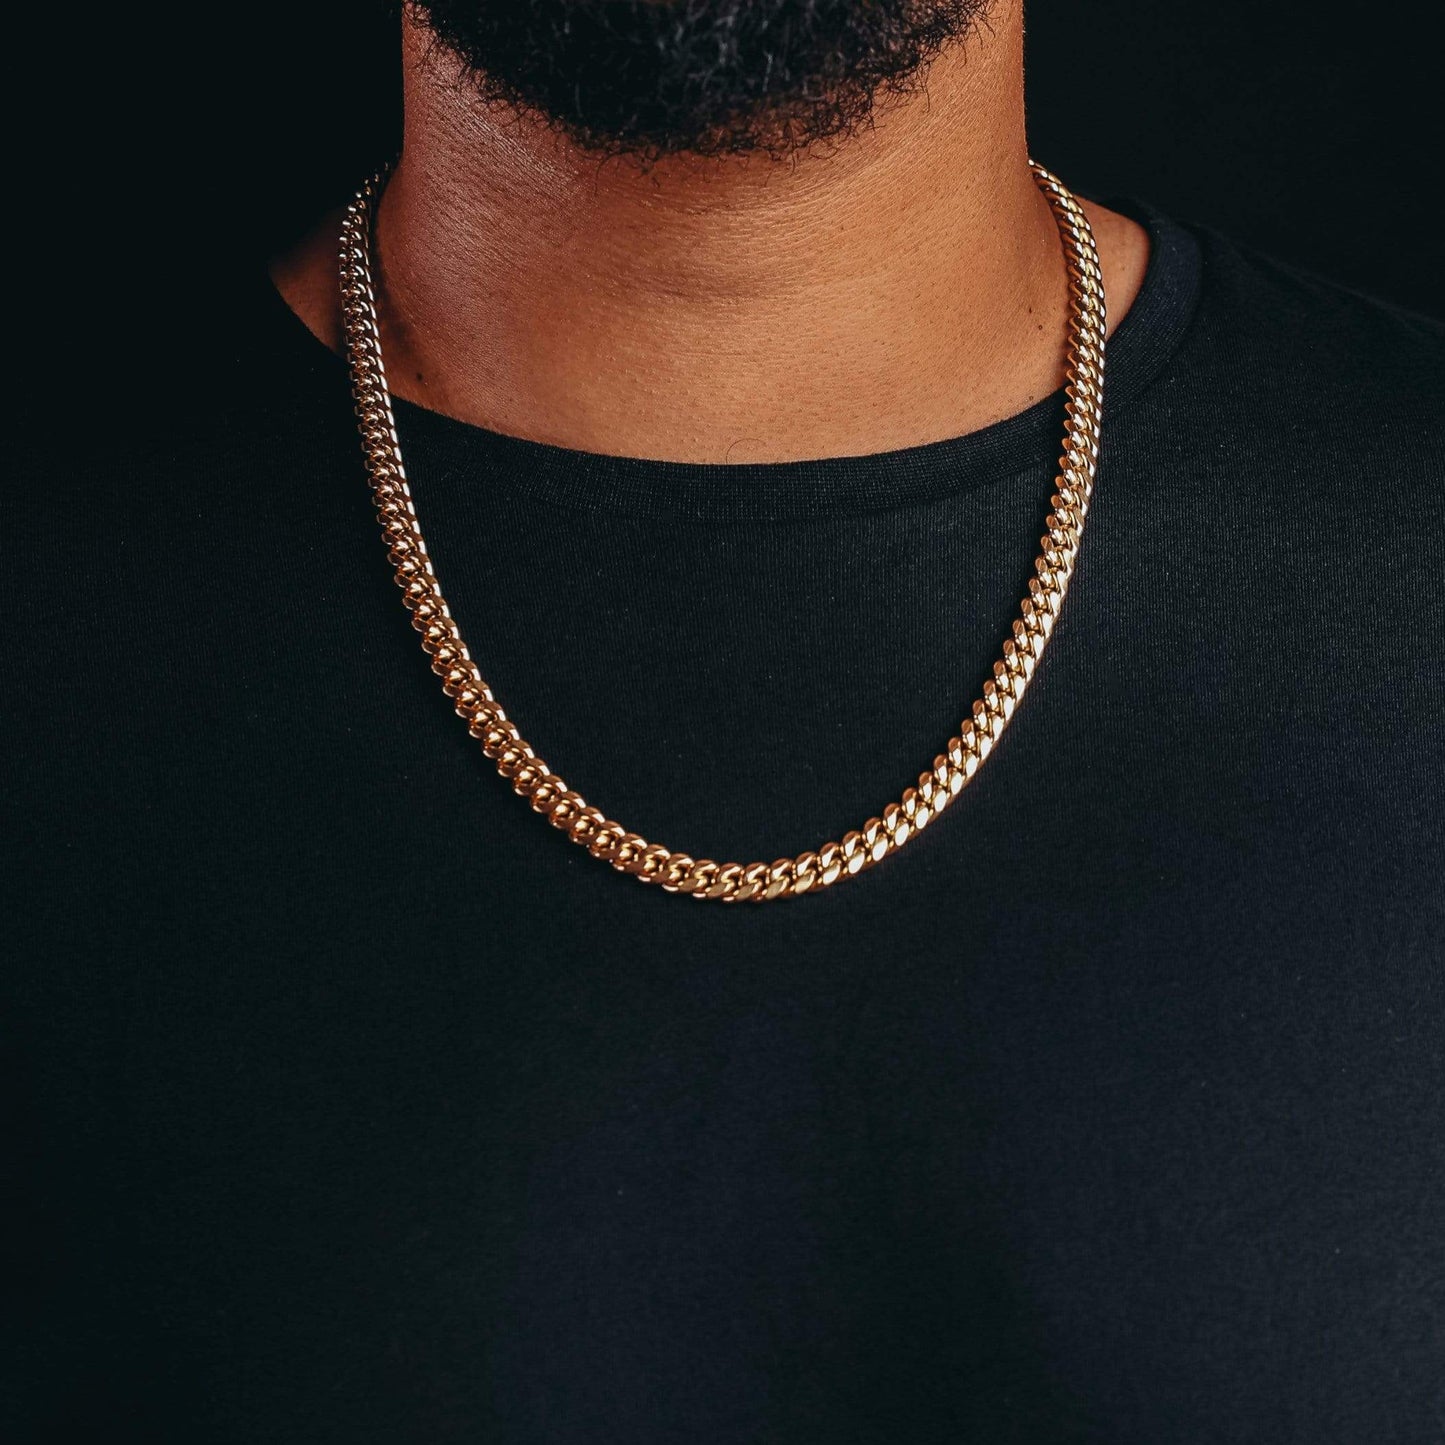 8mm Gold Plated Miami Cuban Ketting